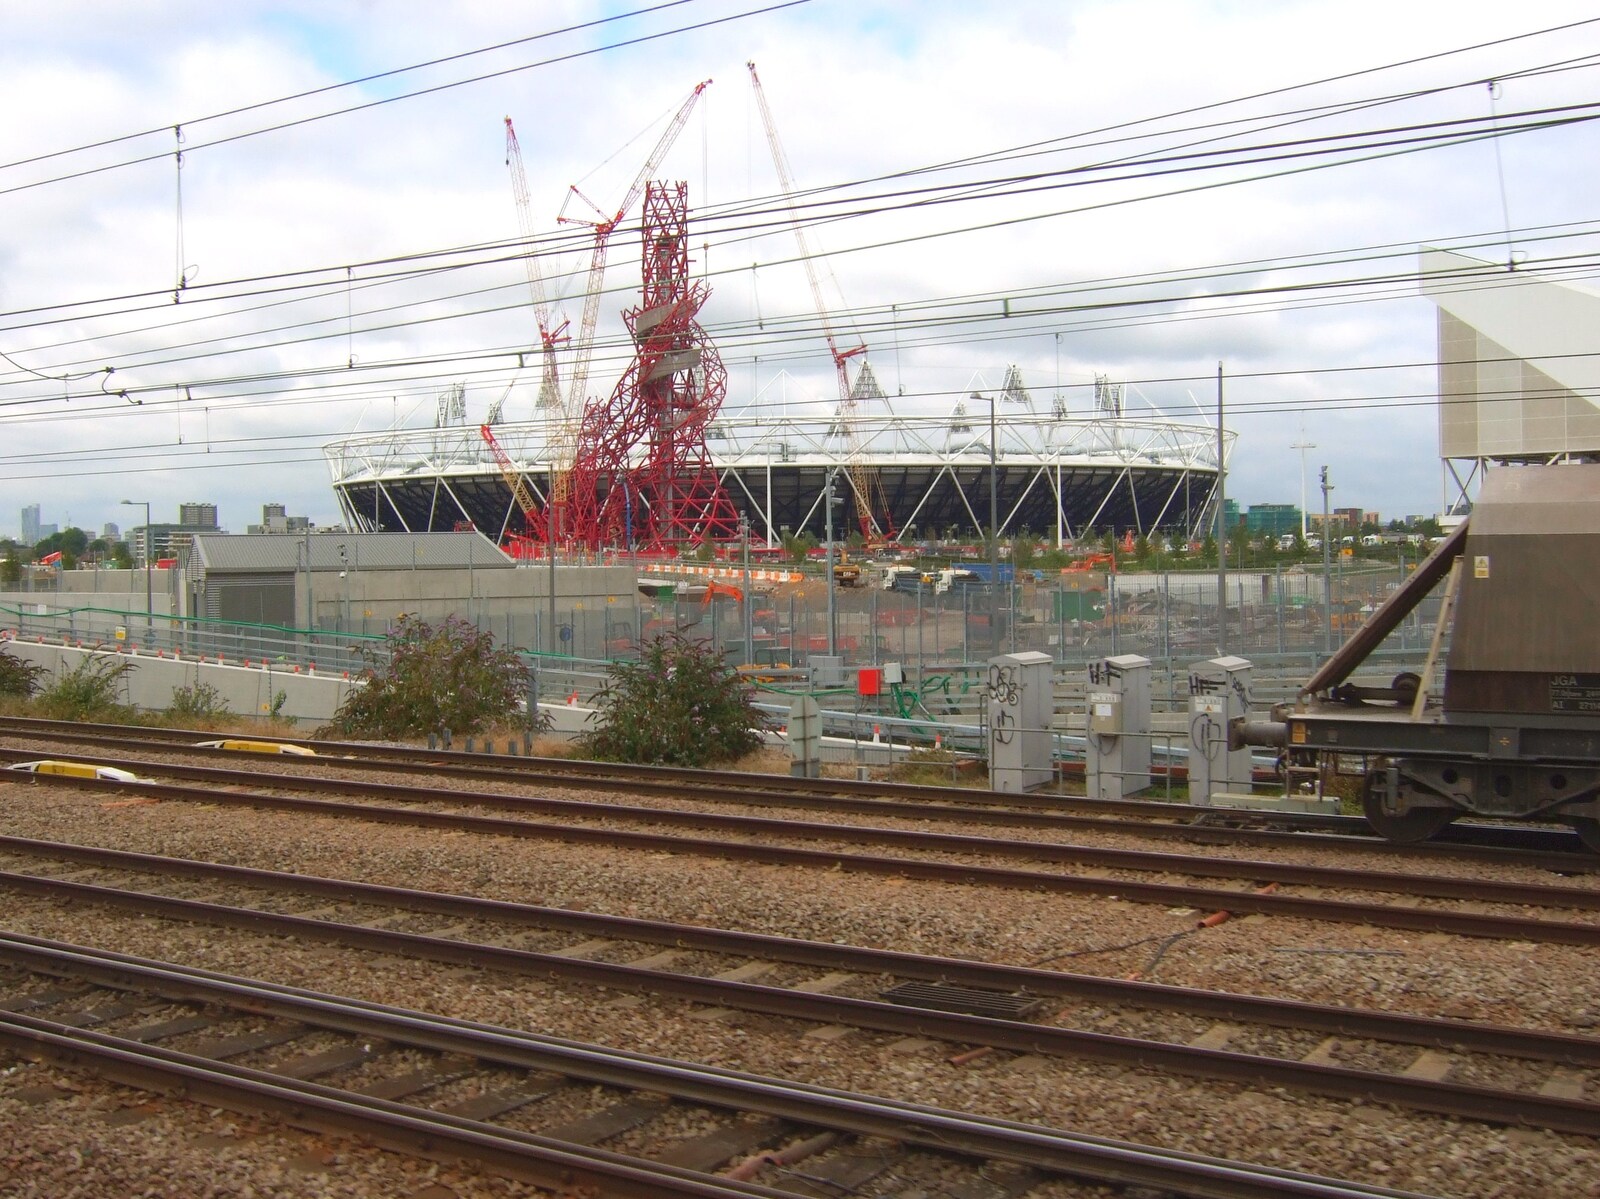 The Olympic athletics venue and the Helter-Skelter from On the Rails, and a Kebab, Stratford and Diss, Norfolk - 31st July 2011